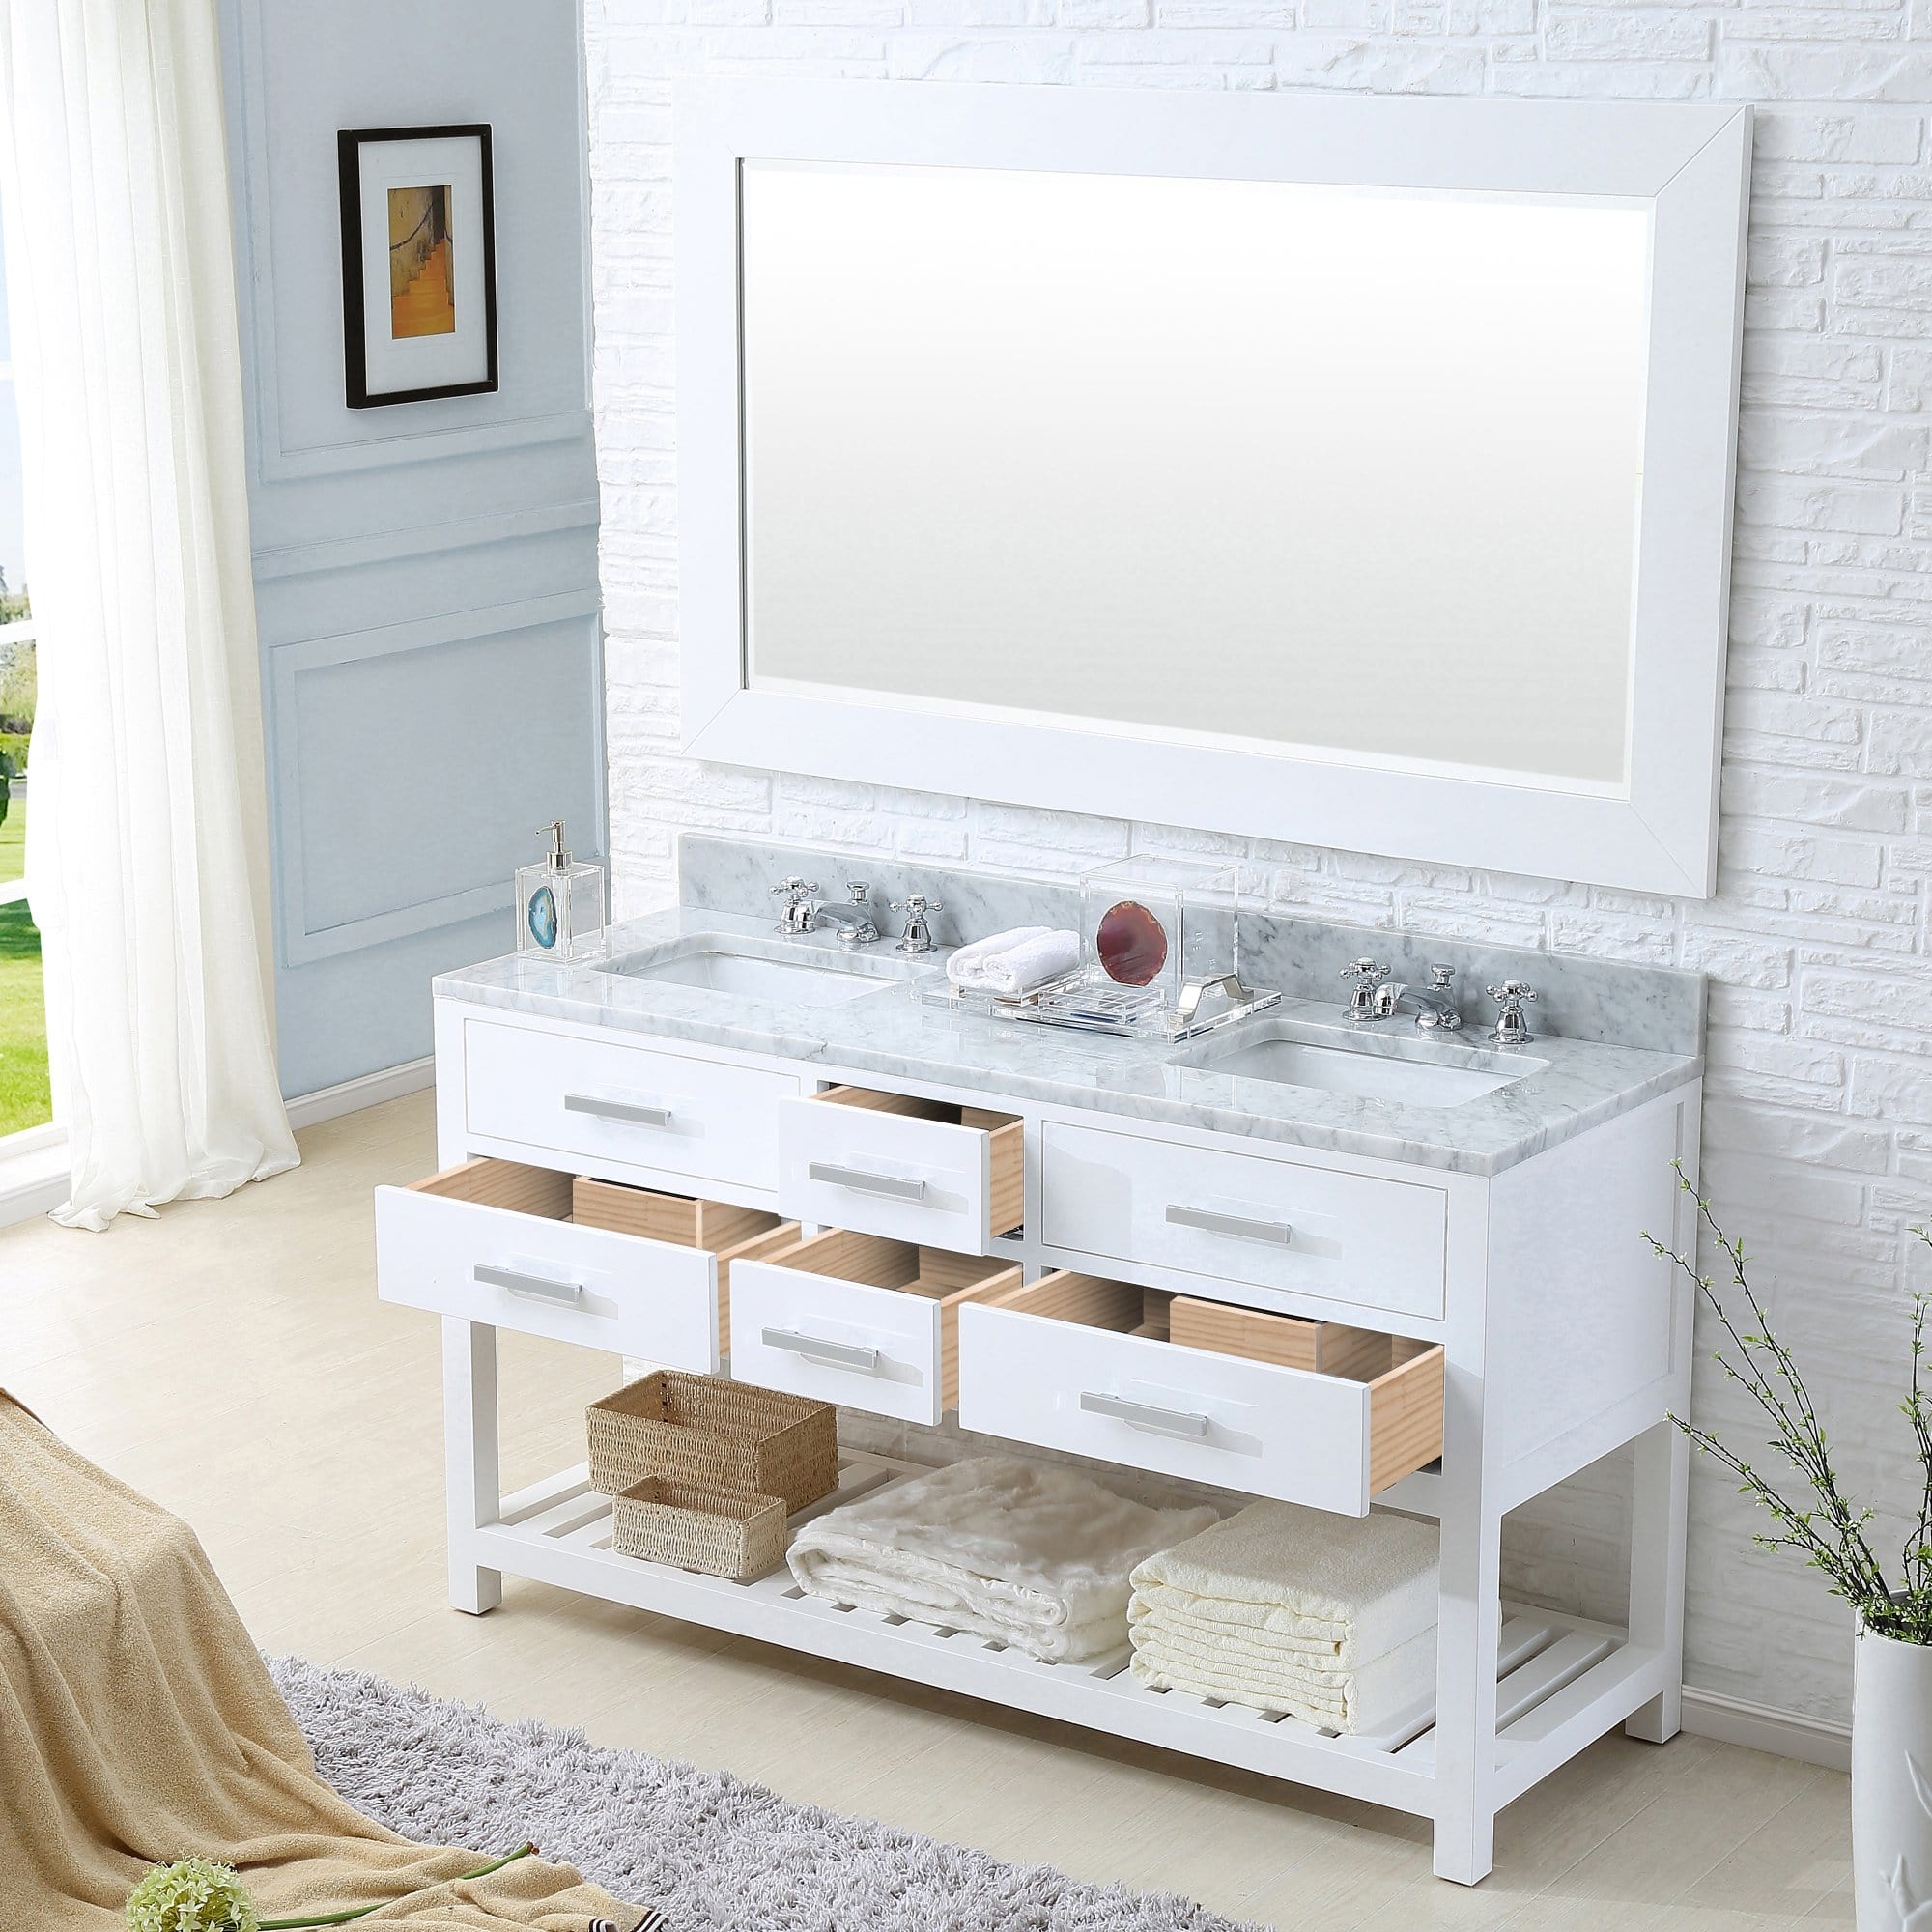 Water Creation 60 Inch Pure White Double Sink Bathroom Vanity With Matching Framed Mirror From The Madalyn Collection - Molaix700621682509Bathroom vanityMA60CW01PW-R60000000